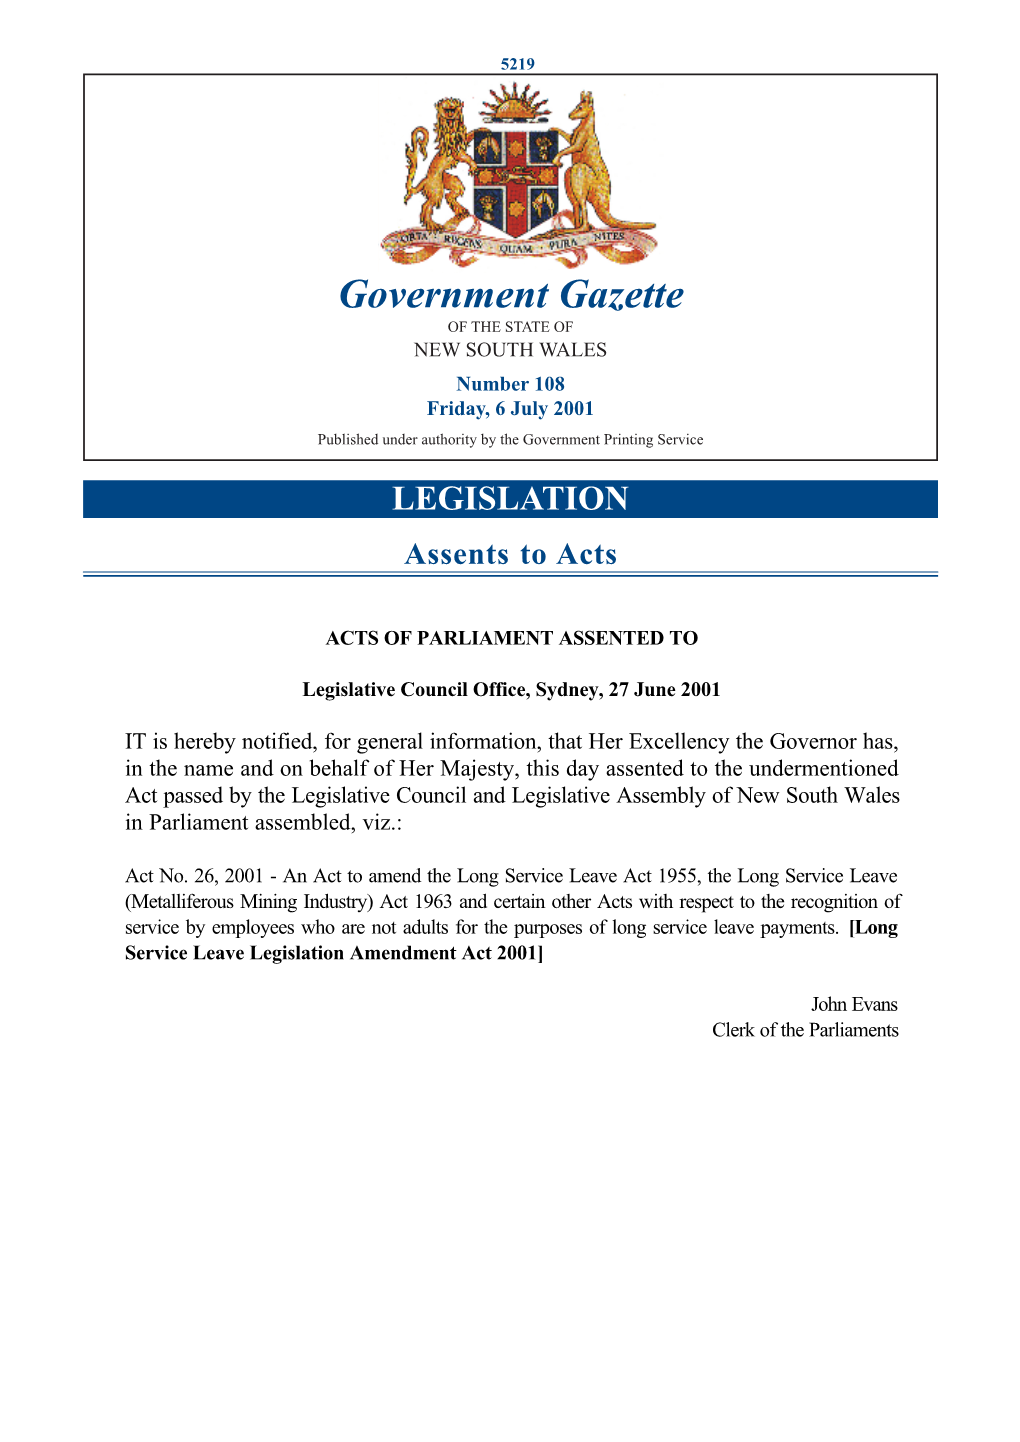 Government Gazette of the STATE of NEW SOUTH WALES Number 108 Friday, 6 July 2001 Published Under Authority by the Government Printing Service